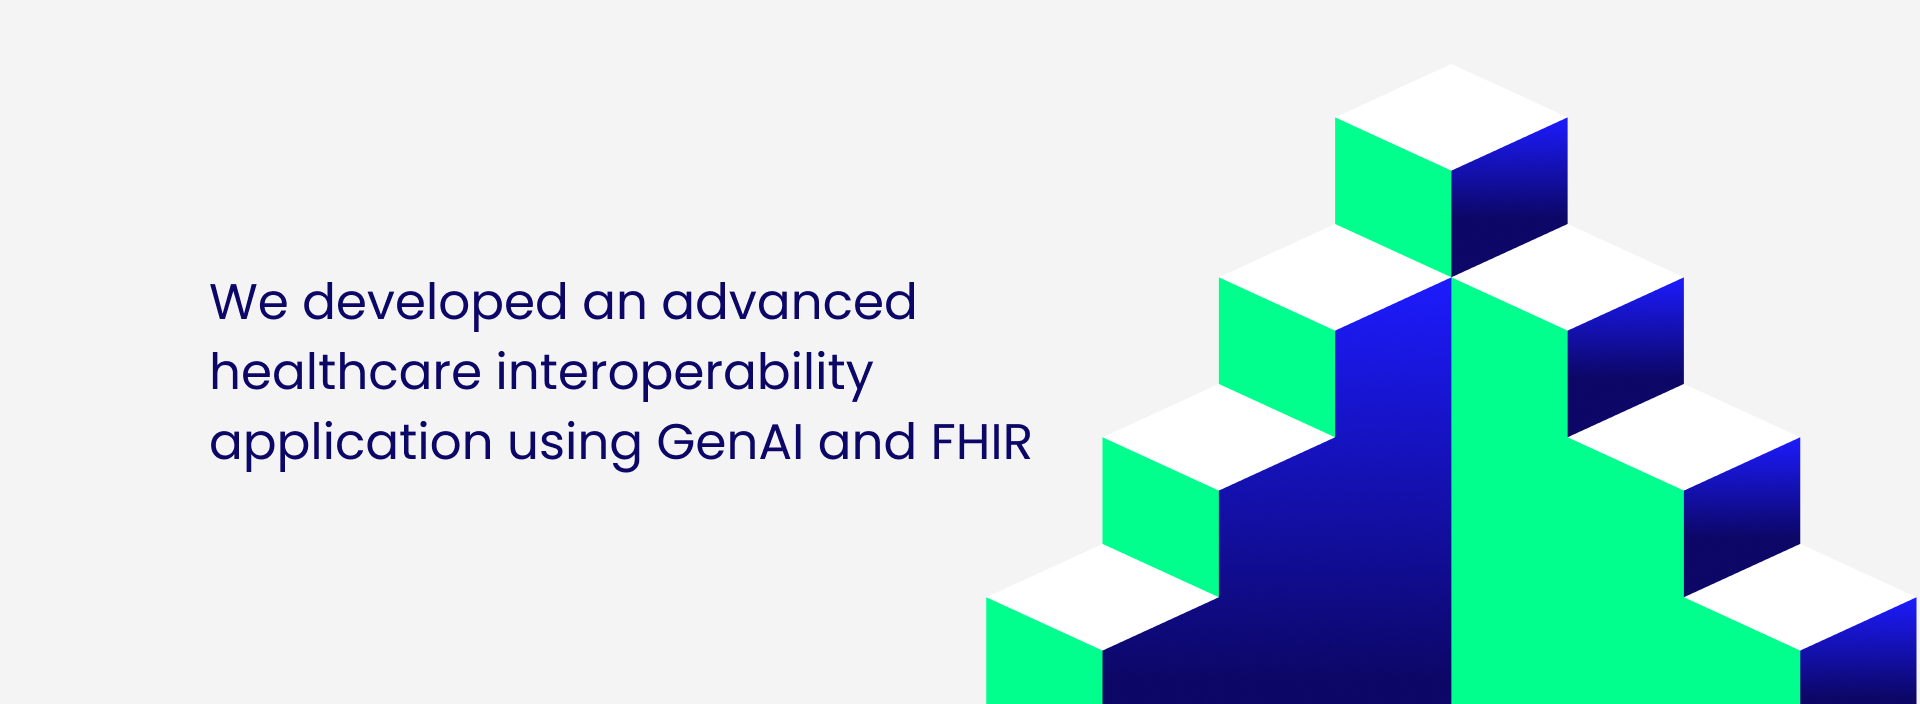 We developed an advanced healthcare interoperability application using GenAI and FHIR